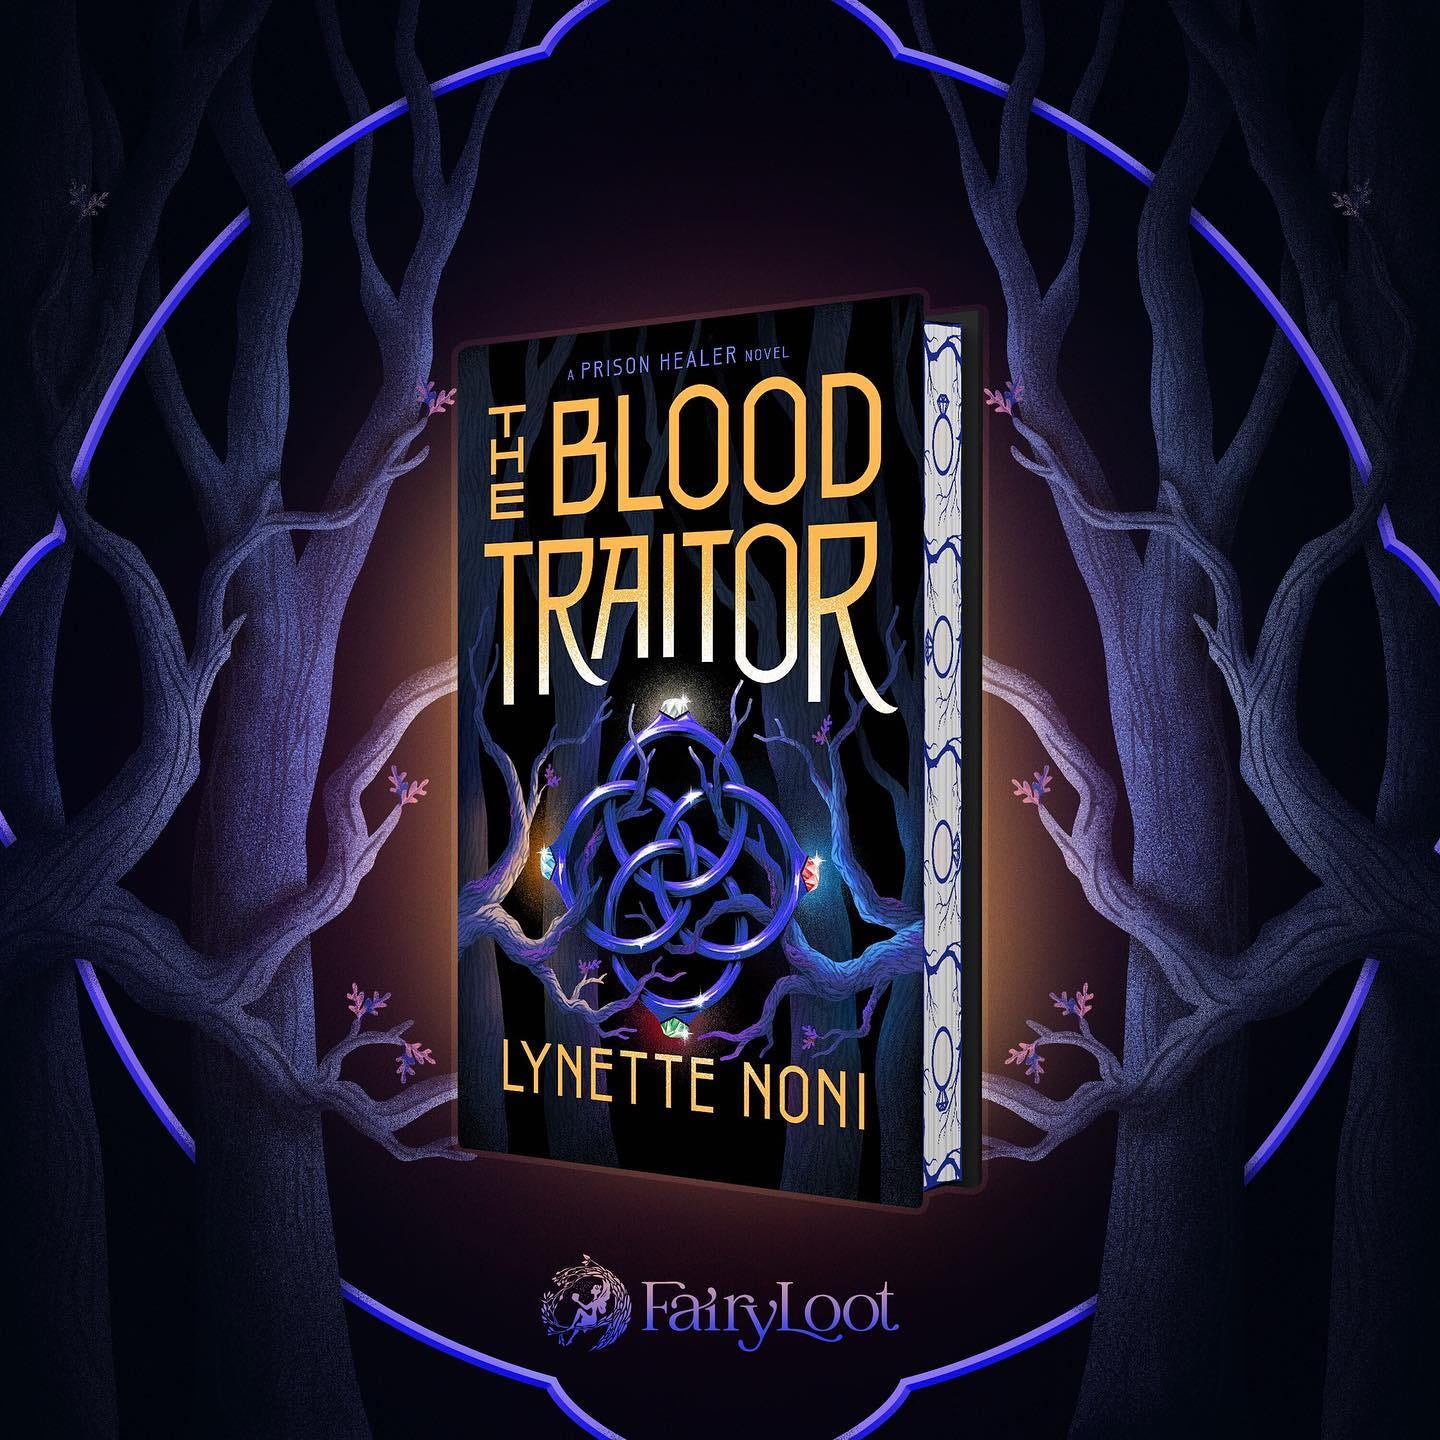 May be an image of book and text that says 'Hã BLOOD TRAITOR LYNETTE NON FairyLoot'